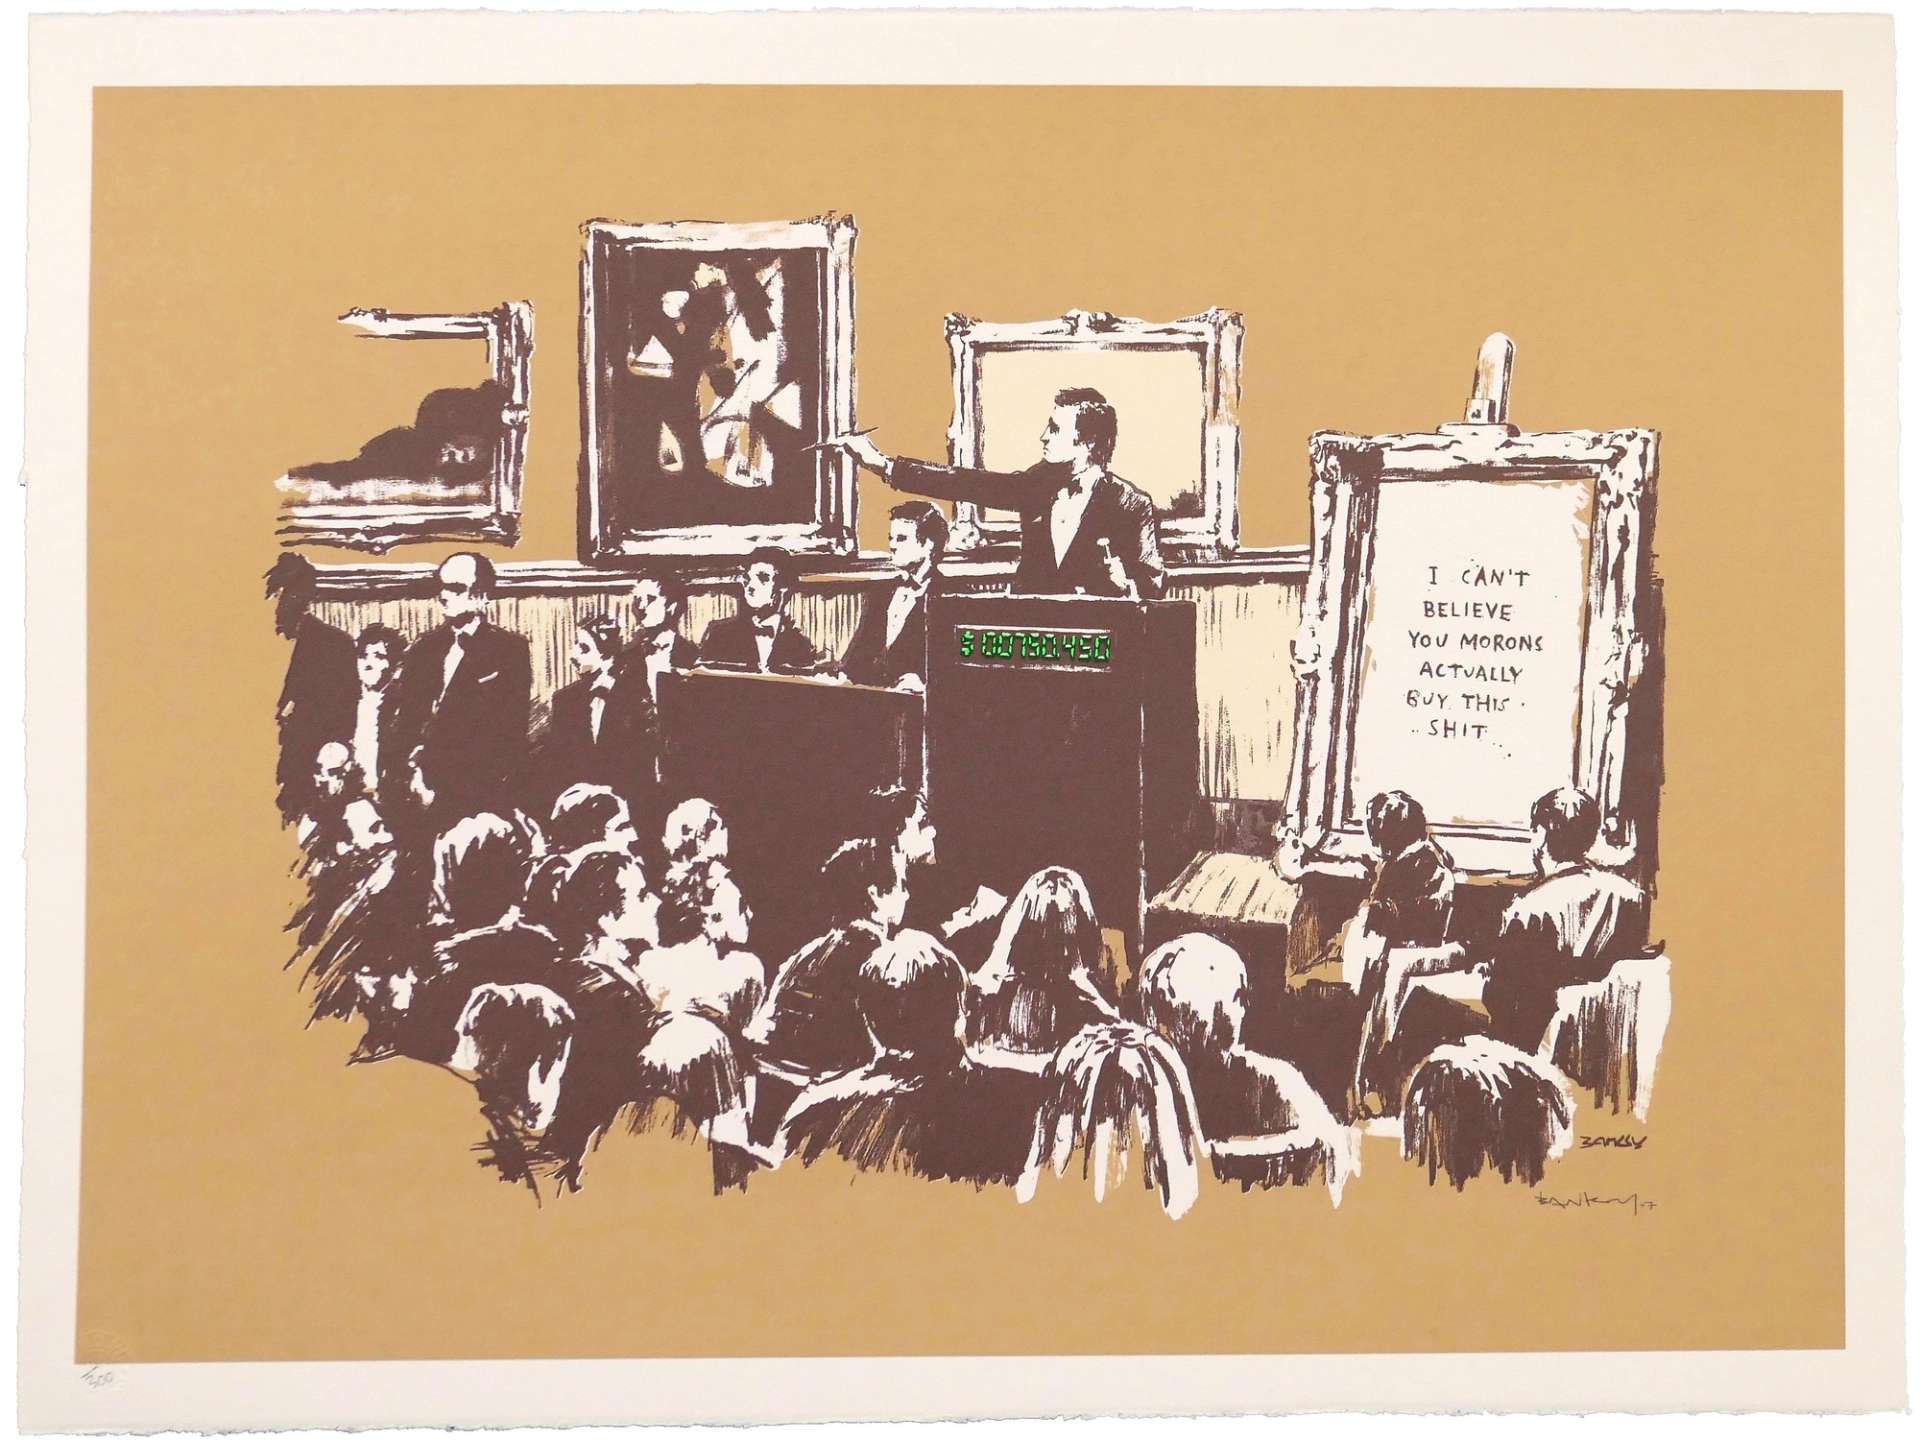 A screenprint by Banksy representing an auction house sale floor, replacing Van Gogh's Sunflowers, sold for £22.5m, with a sign reading "I CAN'T BELIEVE YOU MORONS ACTUALLY BUY THIS SHIT." 